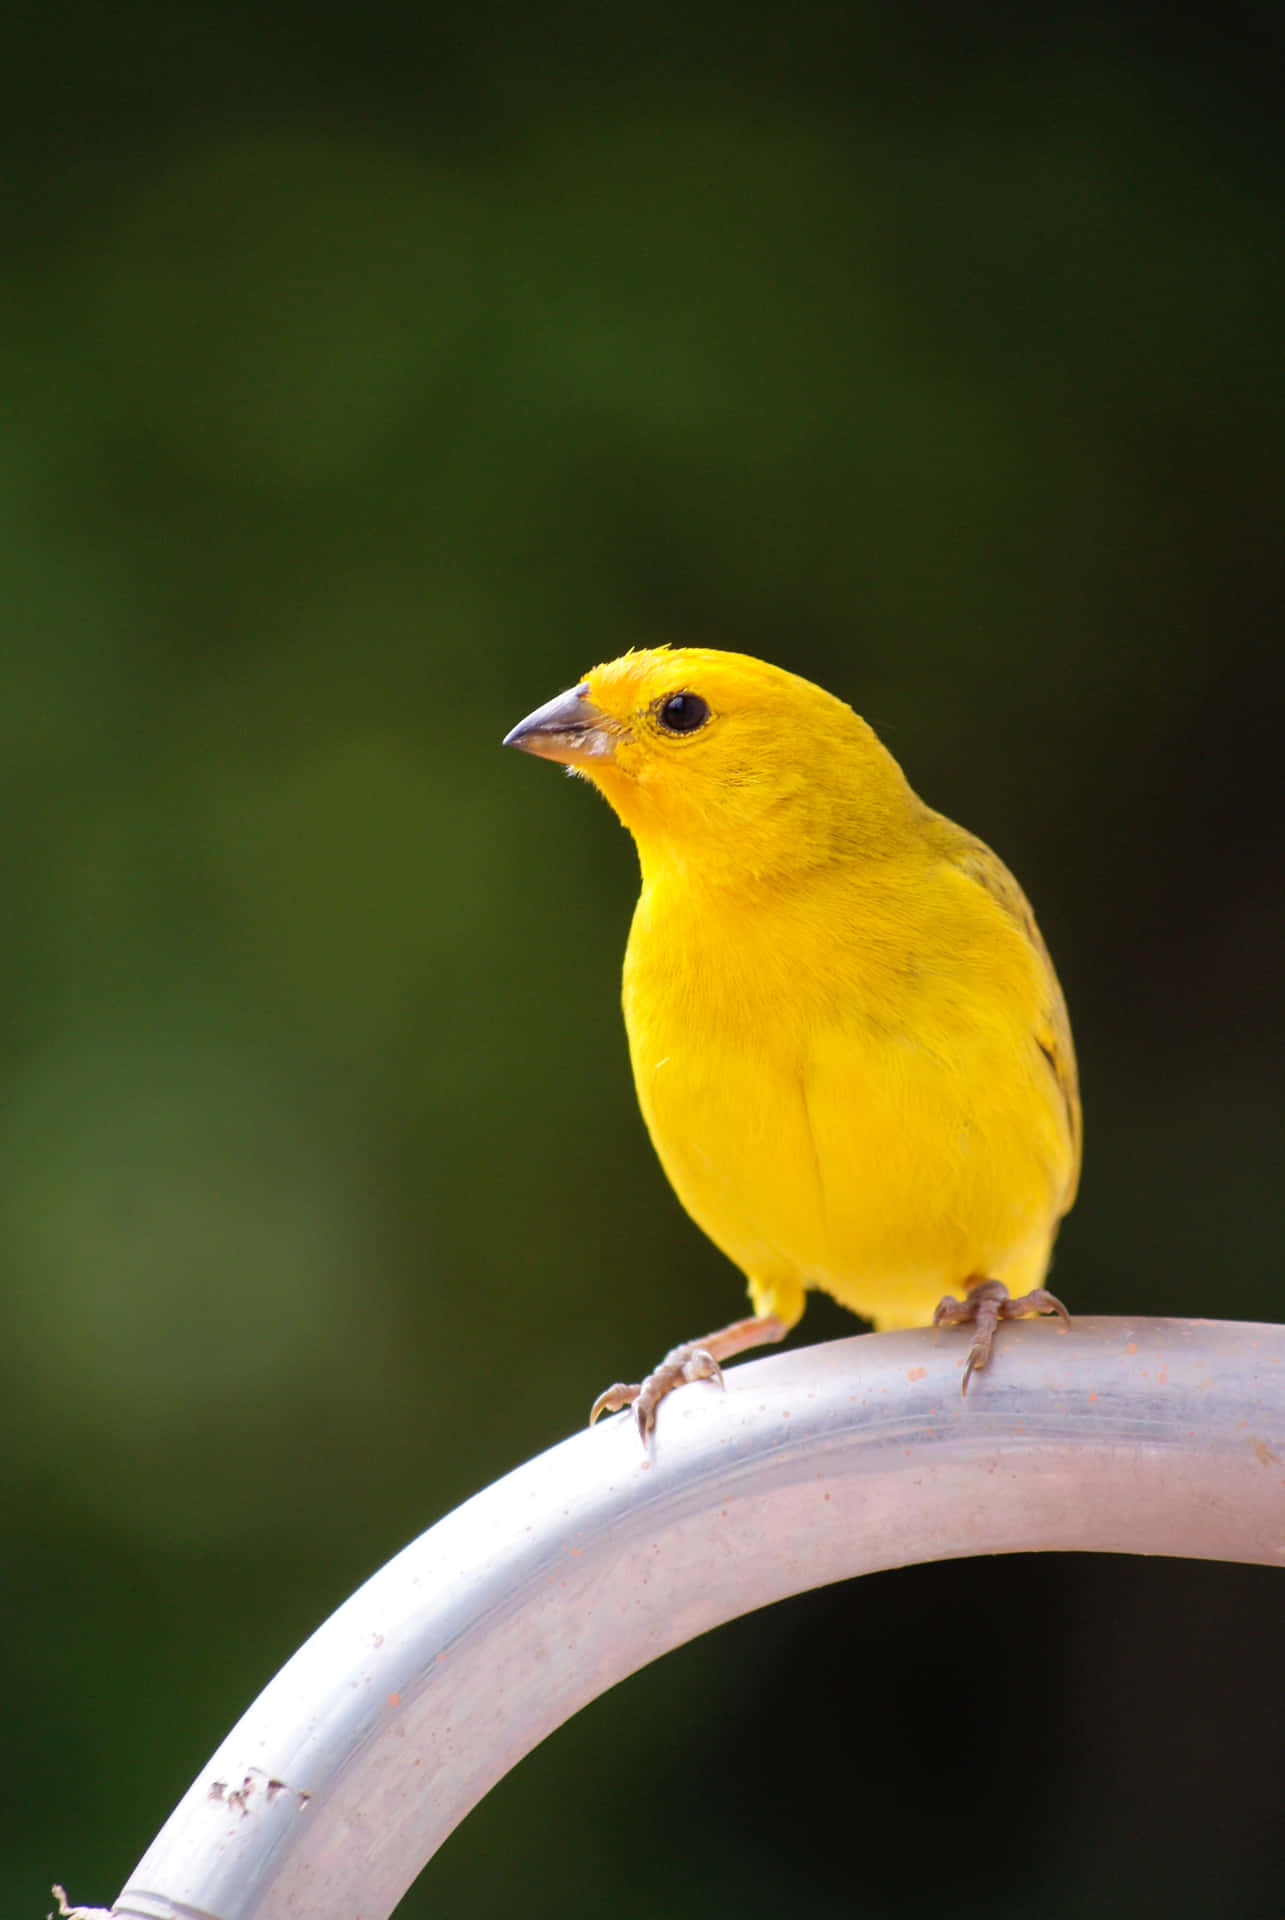 A vibrant Yellow Canary perched on a branch Wallpaper